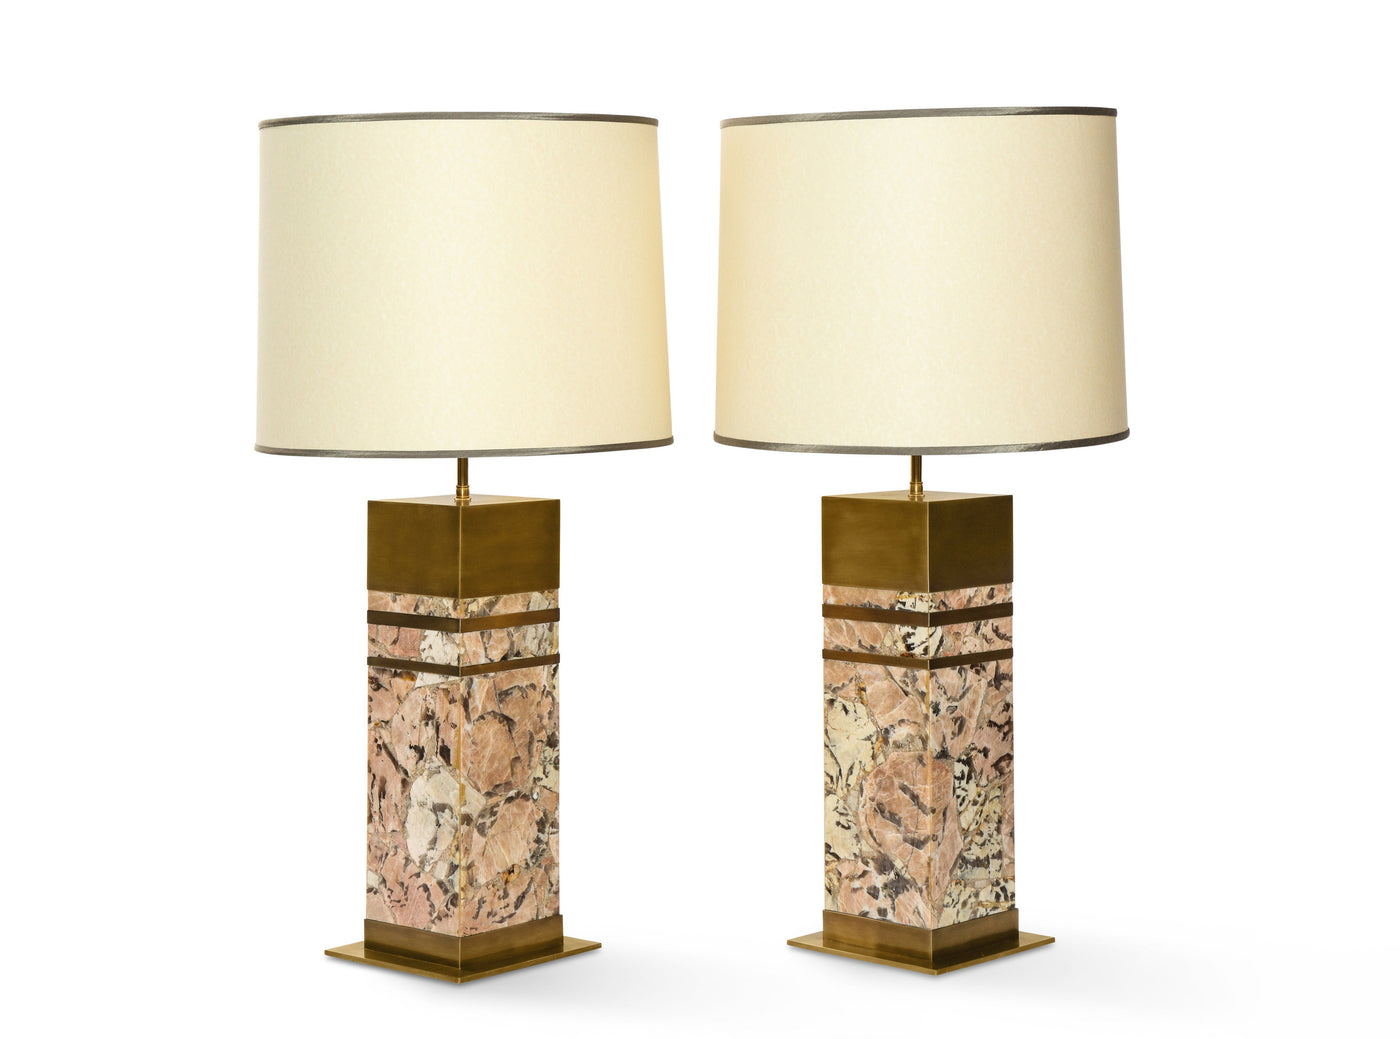 "Irusia" Table Lamps By Arriau